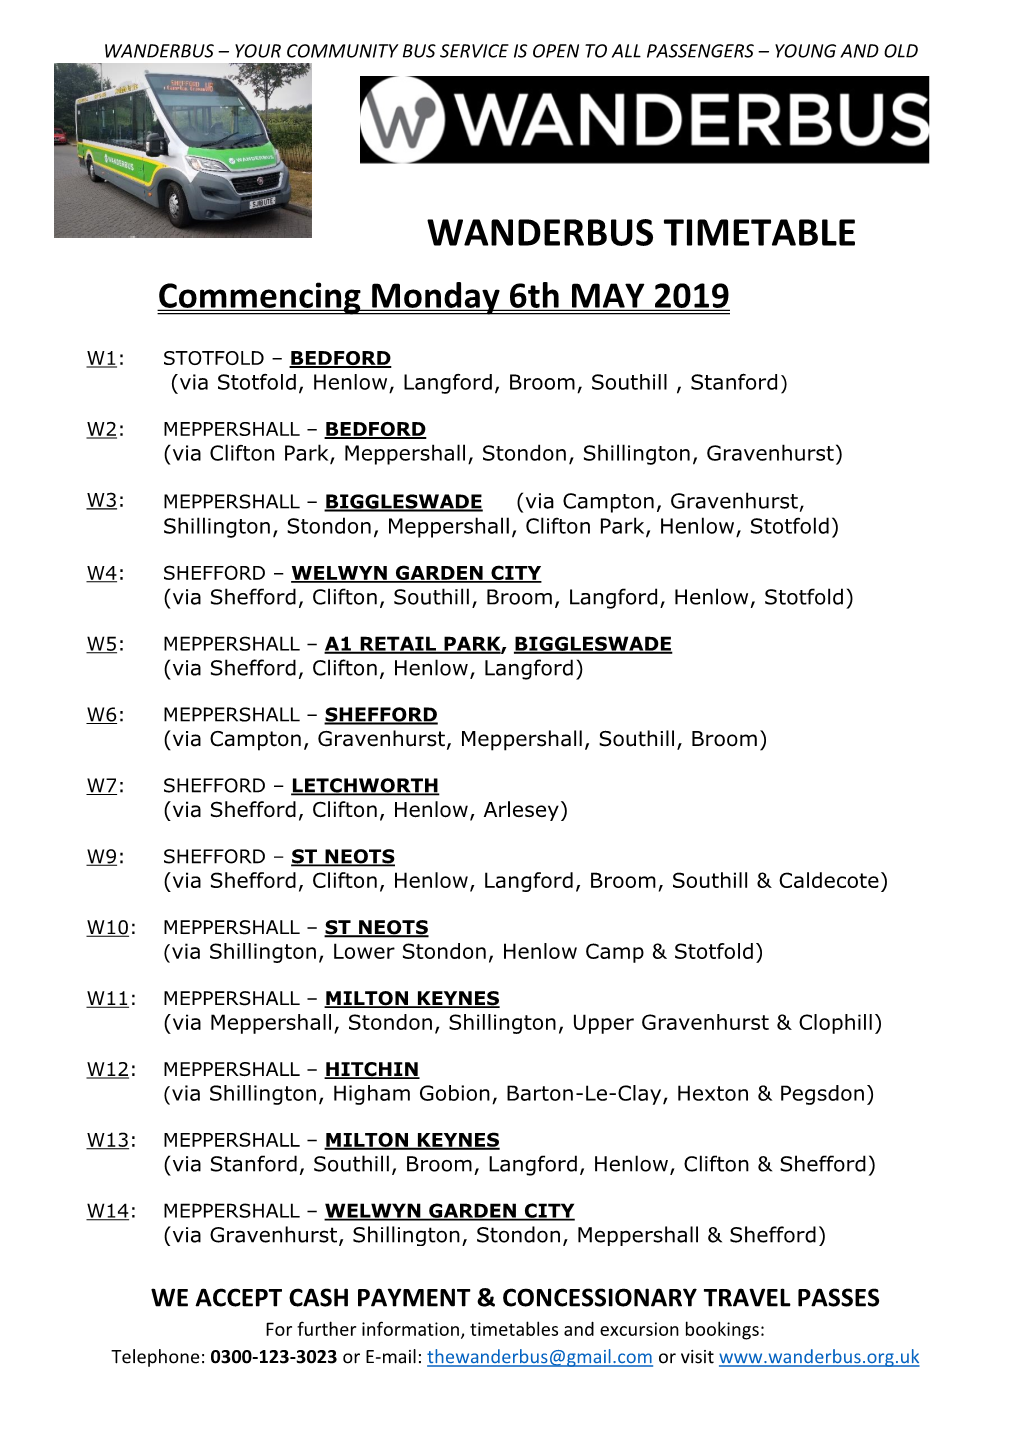 WANDERBUS TIMETABLE Commencing Monday 6Th MAY 2019